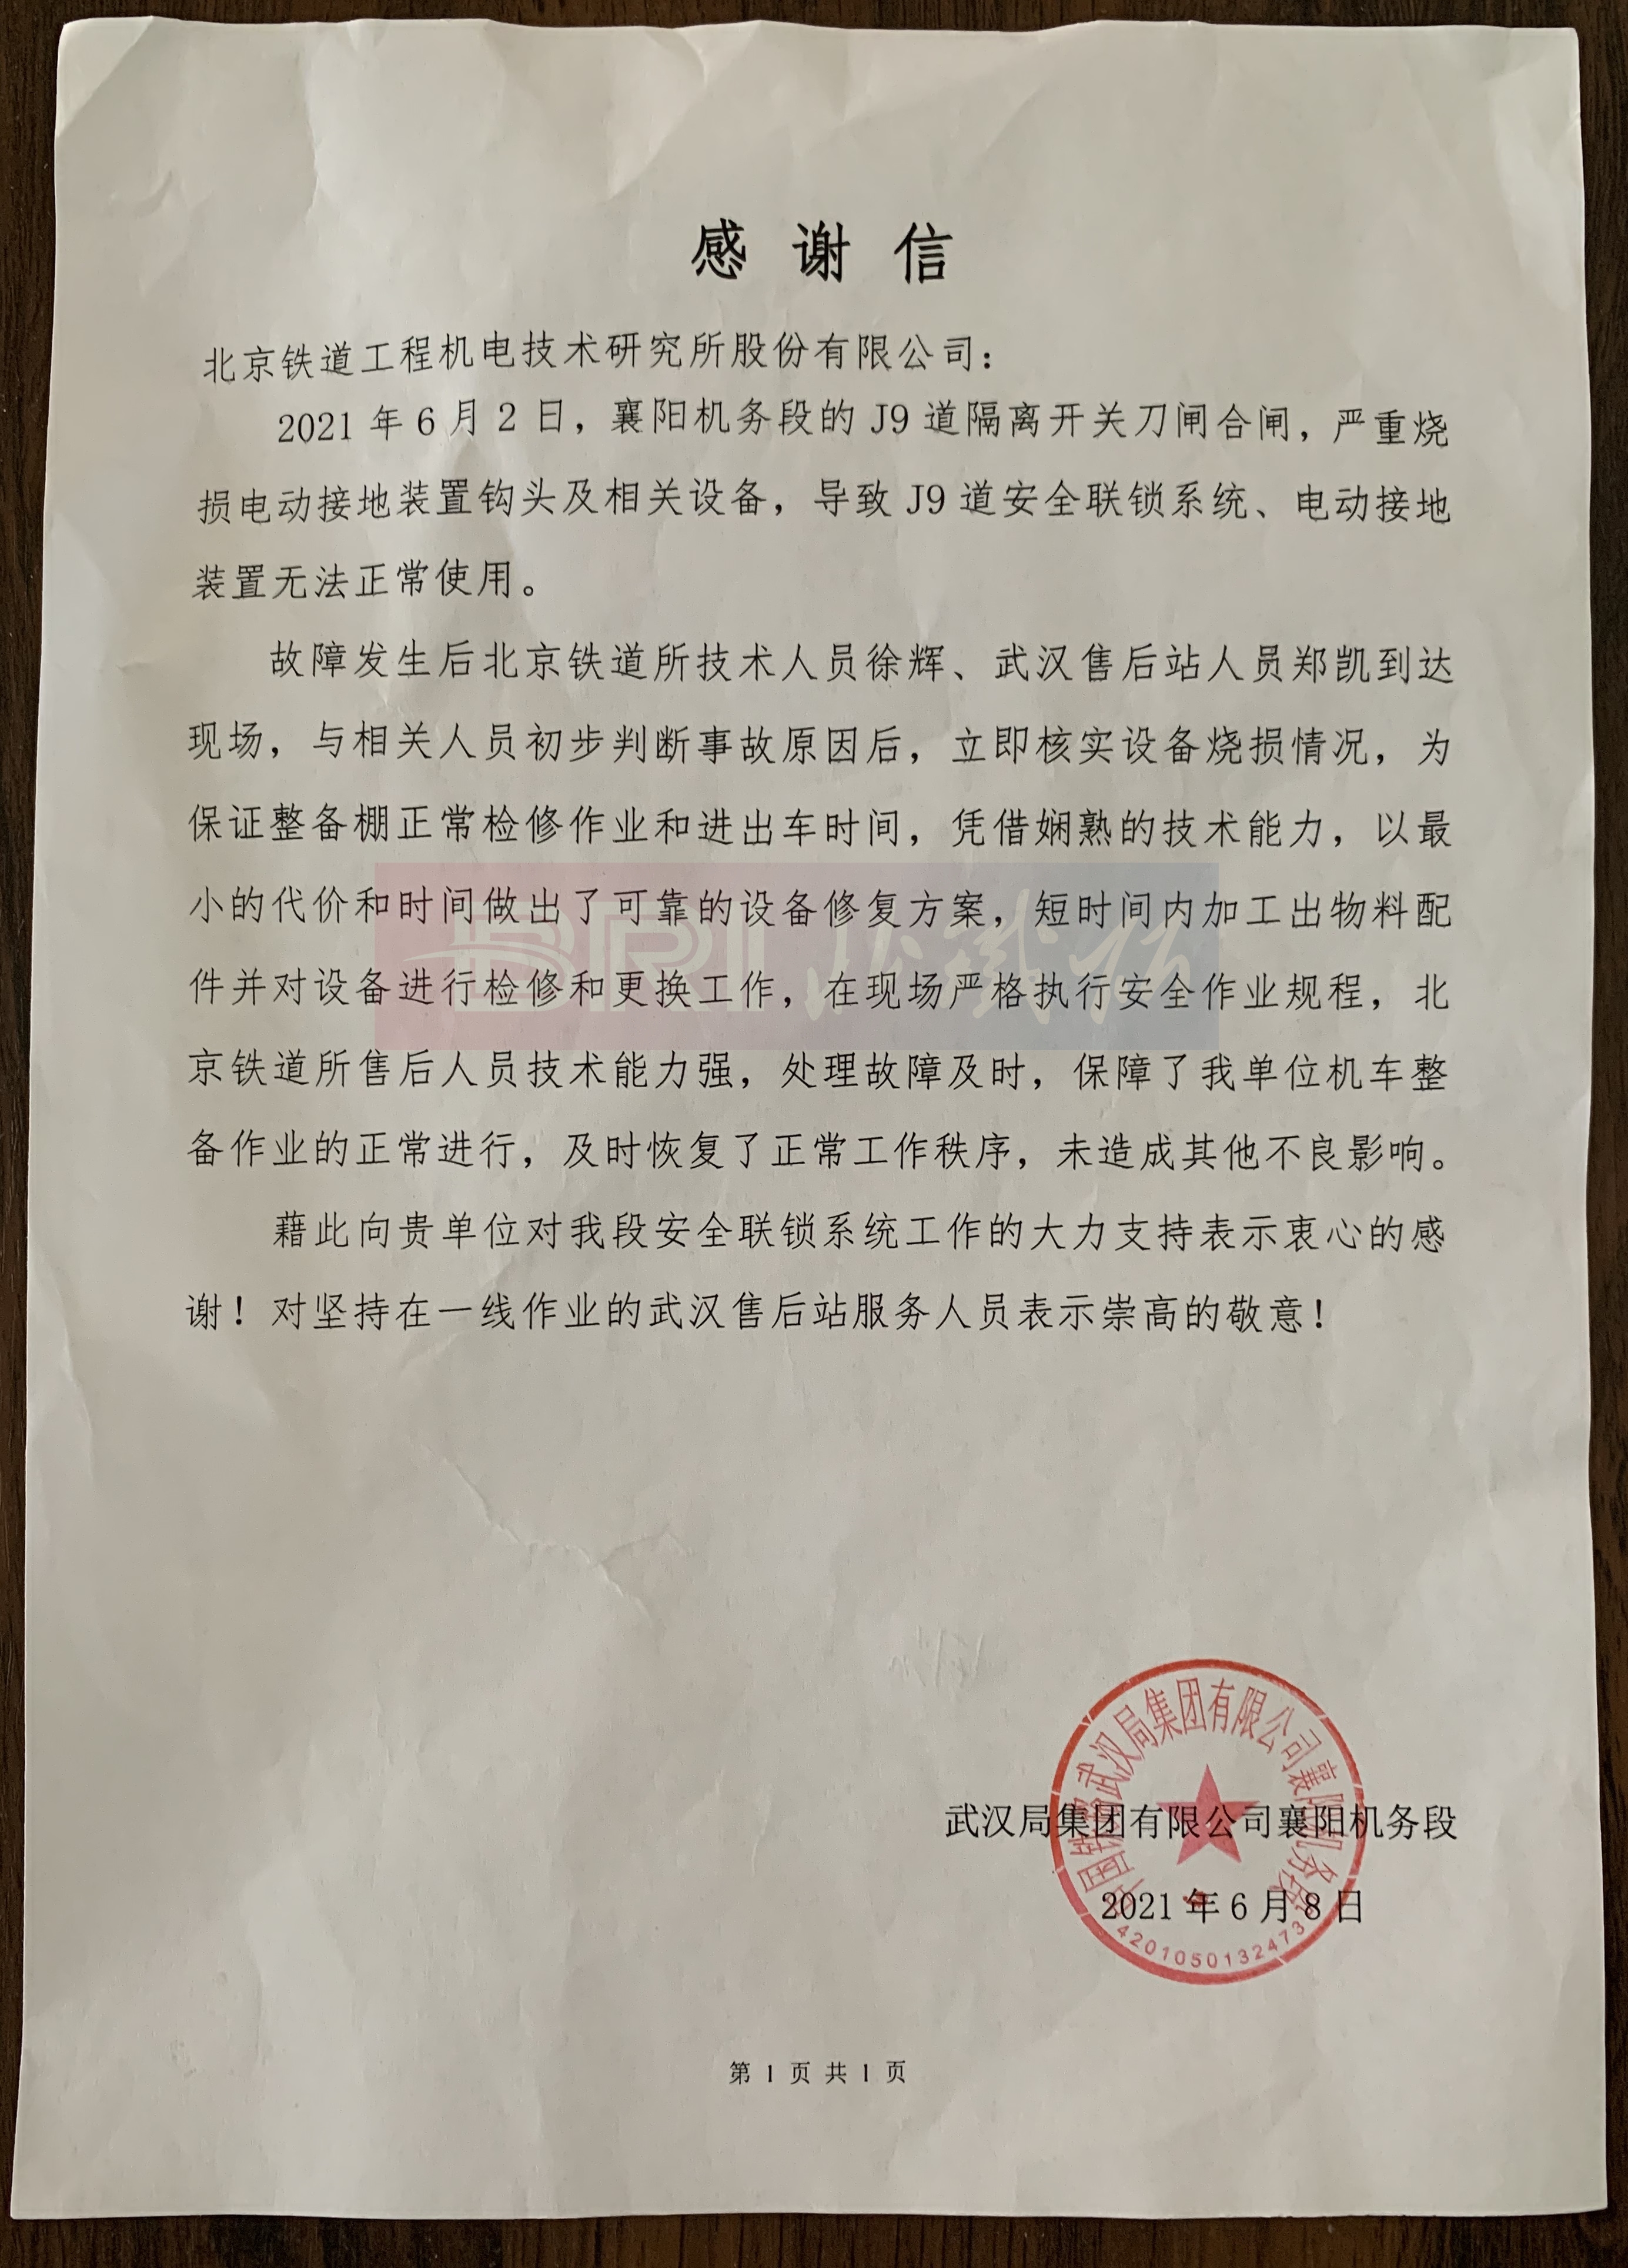 The commendation letter from Xiangyang Locomotive Depot